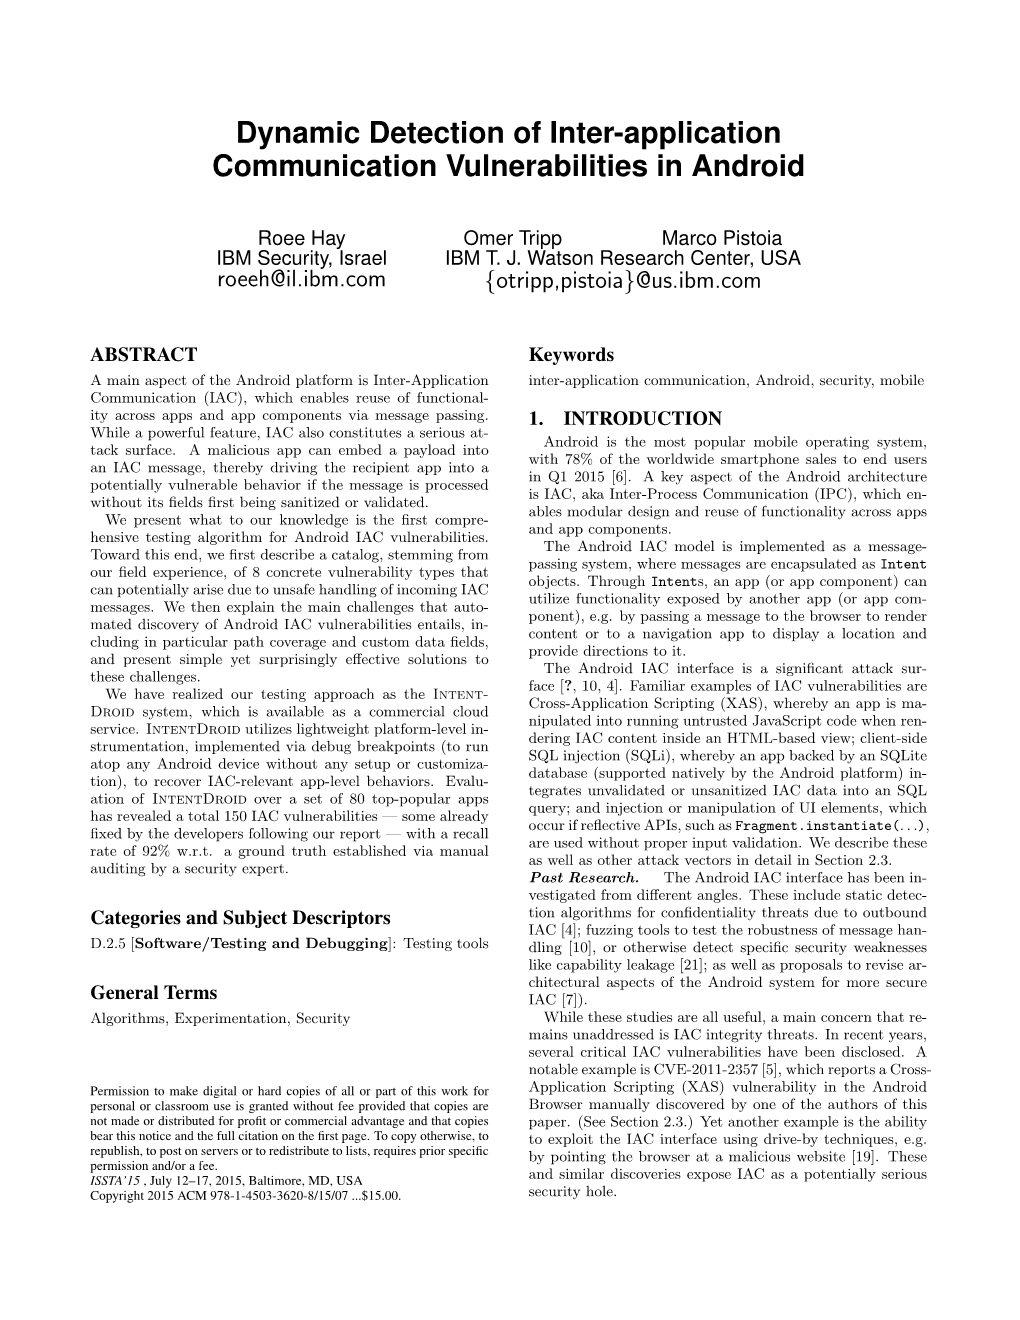 Dynamic Detection of Inter-Application Communication Vulnerabilities in Android